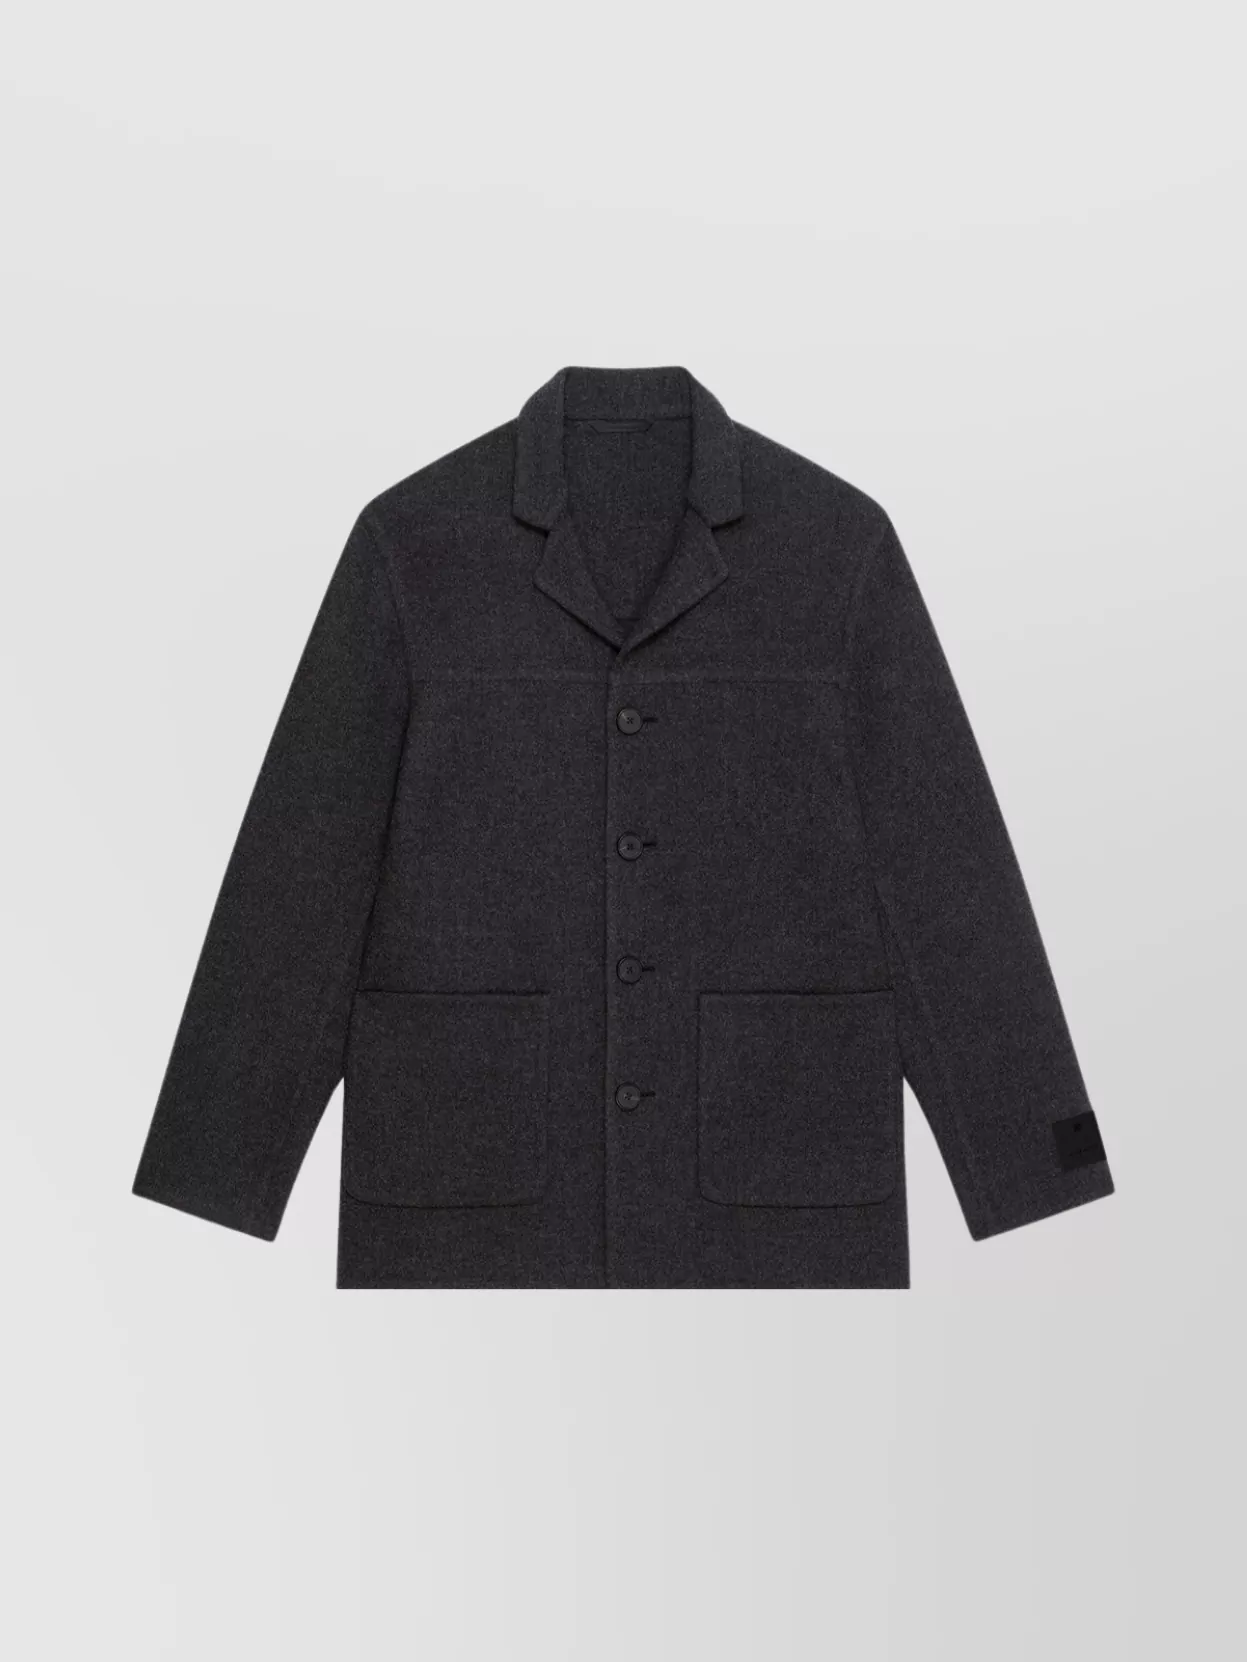 GIVENCHY WOOL CASHMERE BLEND JACKET WITH TEXTURED FABRIC